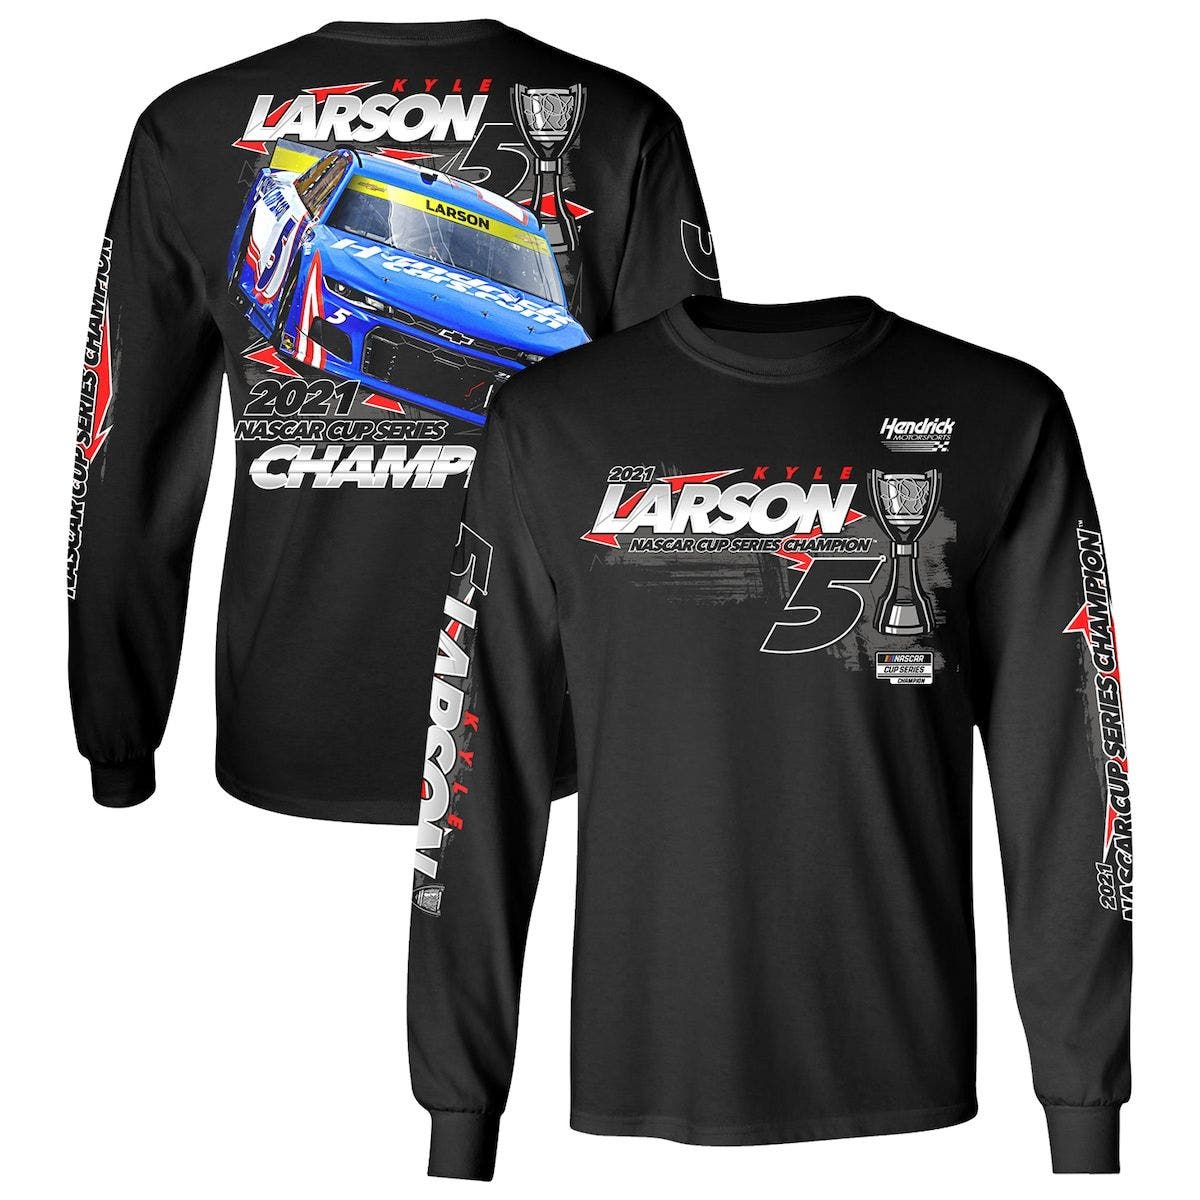 HENDRICK MOTORSPORTS TEAM COLLECTION Men's Hendrick Motorsports Team Collection Black Kyle Larson 2021 NASCAR Cup Series Champion Graphic Long Sleeve T-Shirt at Nordstrom